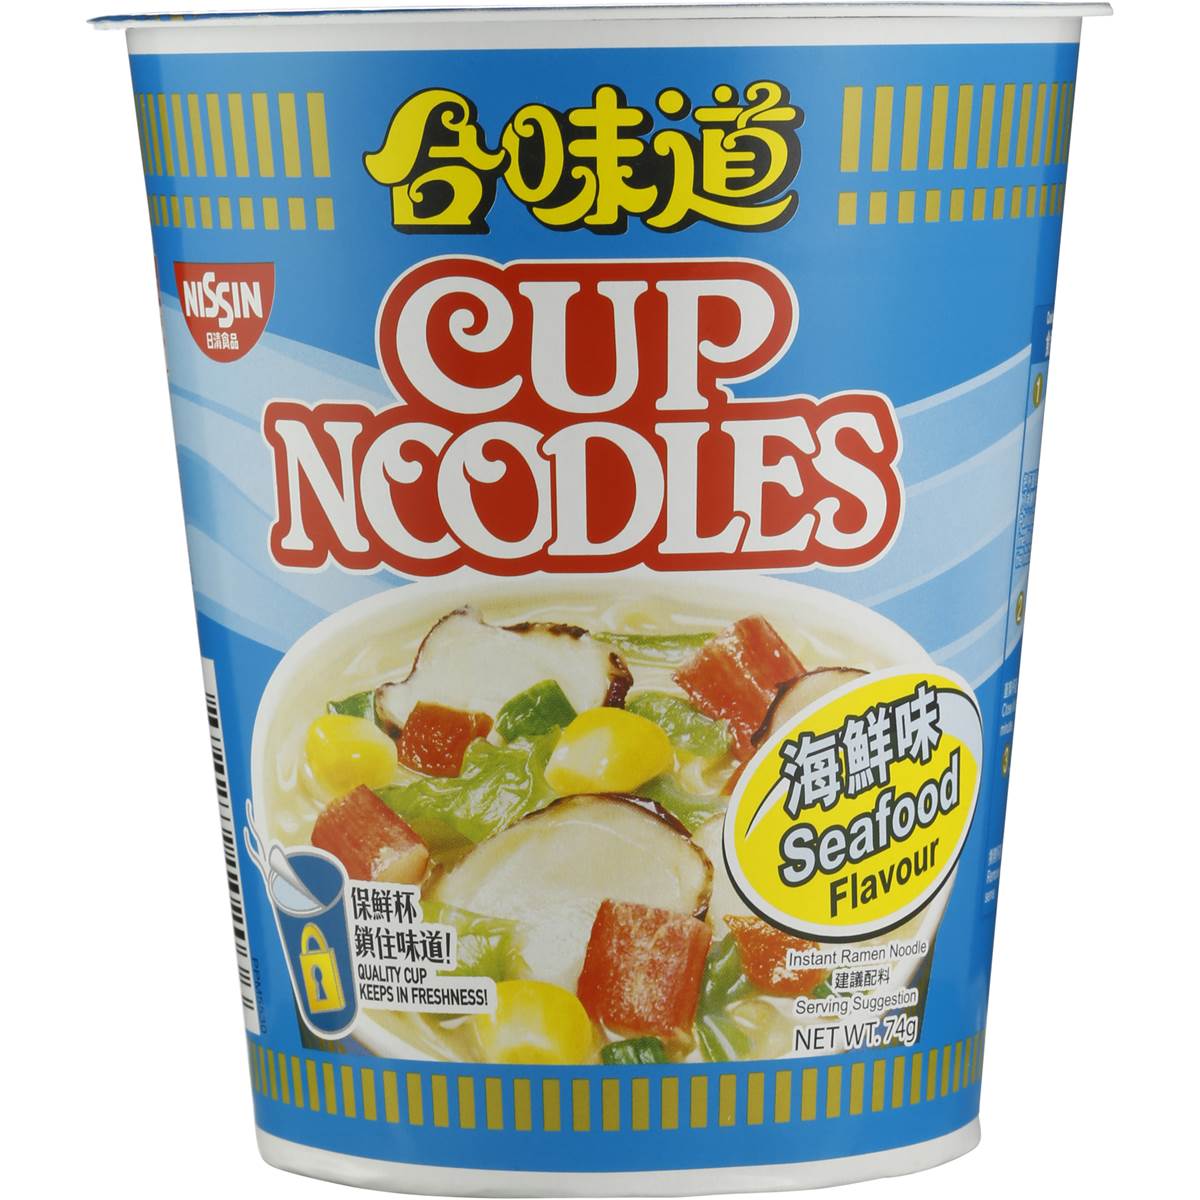 Nissin Noodles Cup Seafood